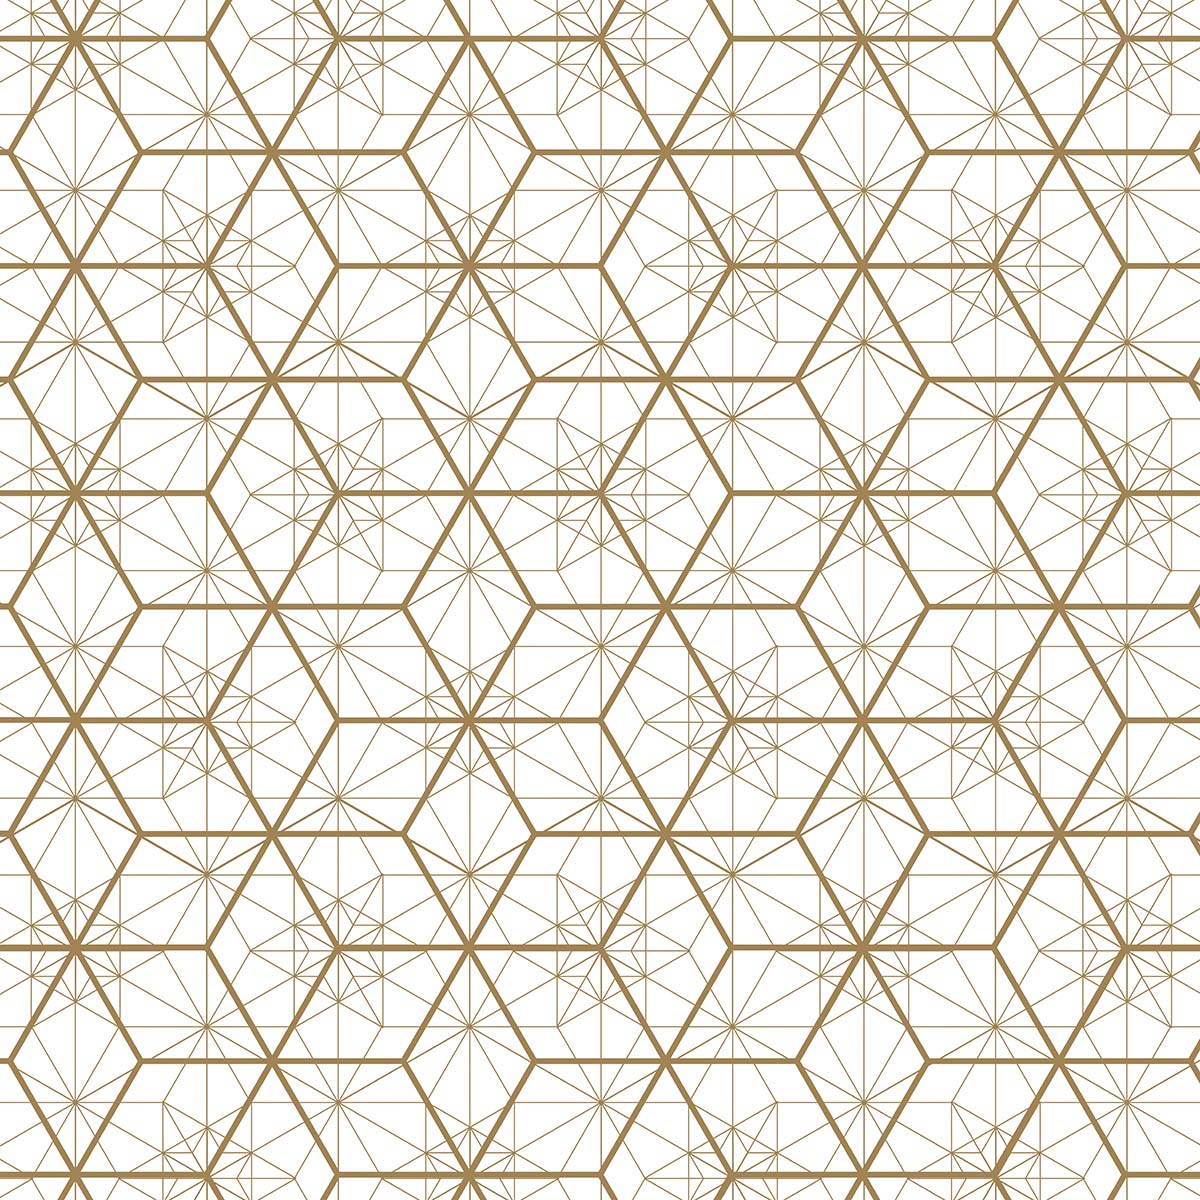 A pattern of hexagons and squares